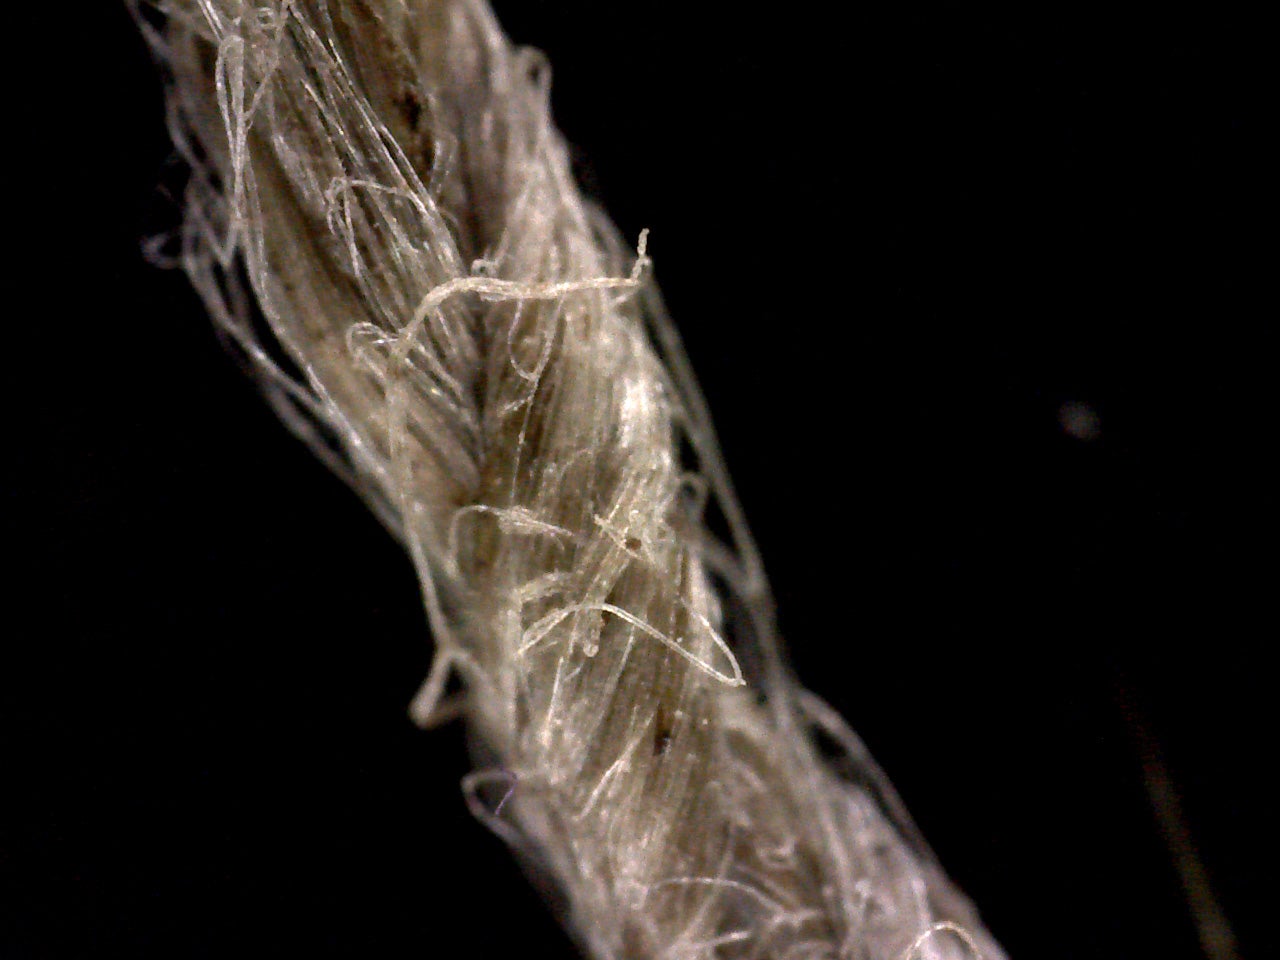 Close-up of modern flax cordage showing twisted fibre construction